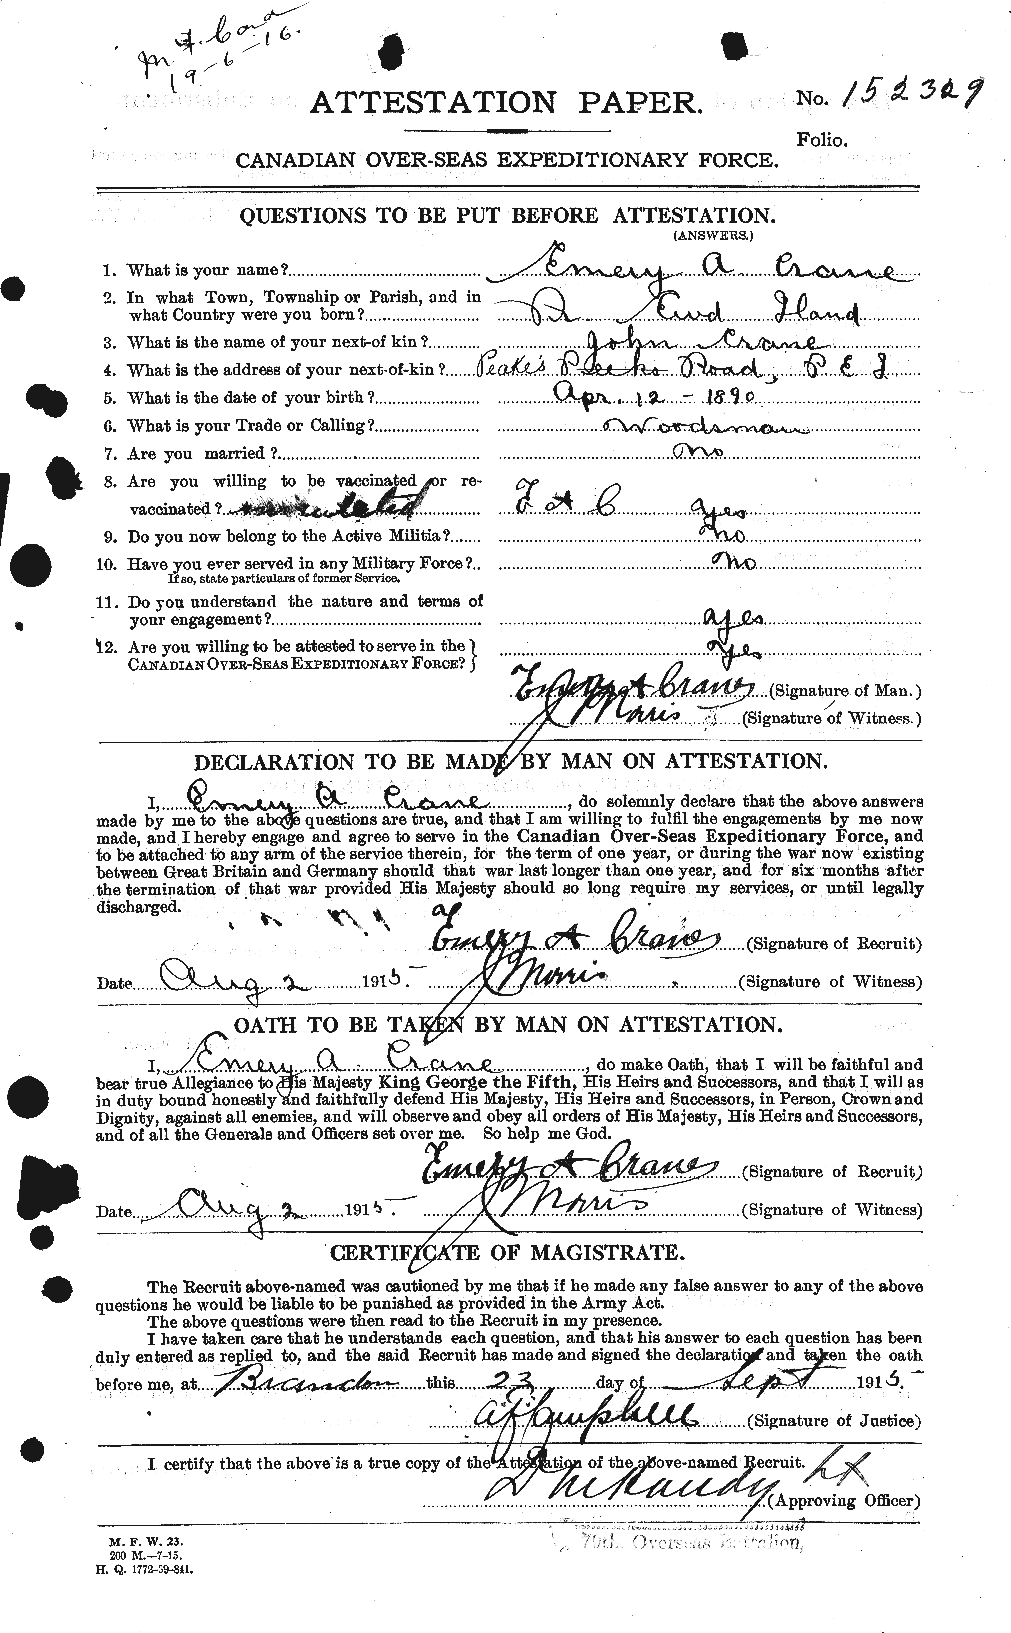 Personnel Records of the First World War - CEF 062017a